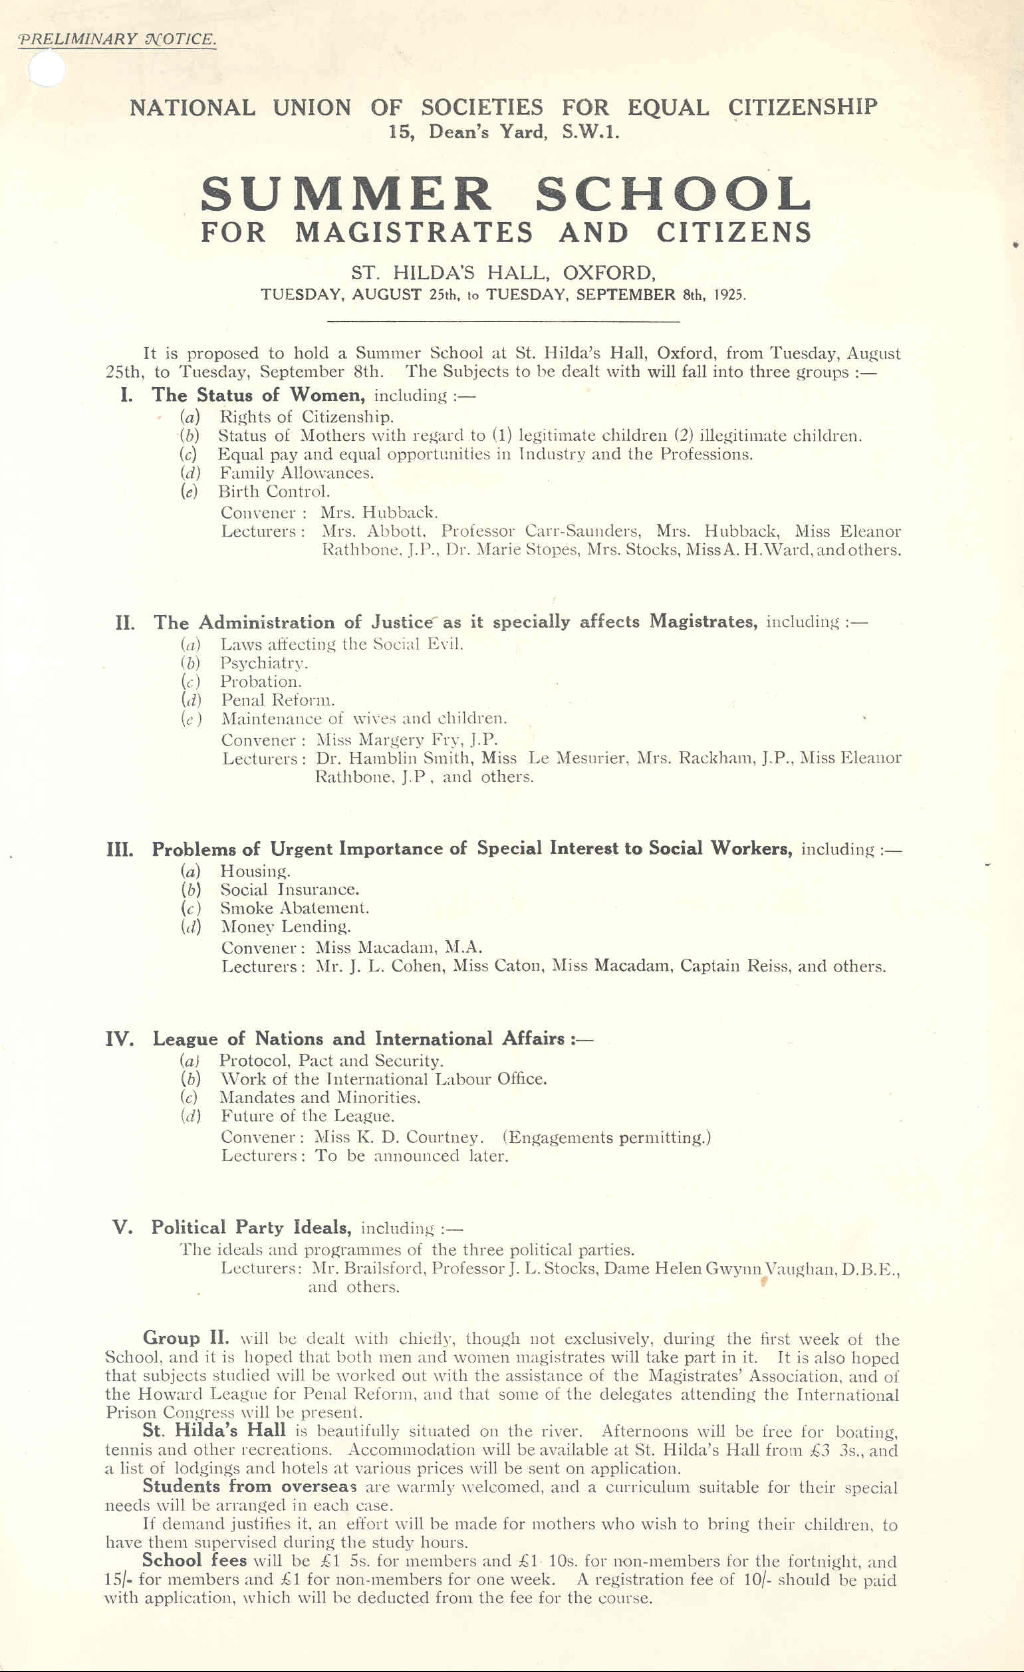 Preliminary notice of a summer school for magistrates and citizens, 1925